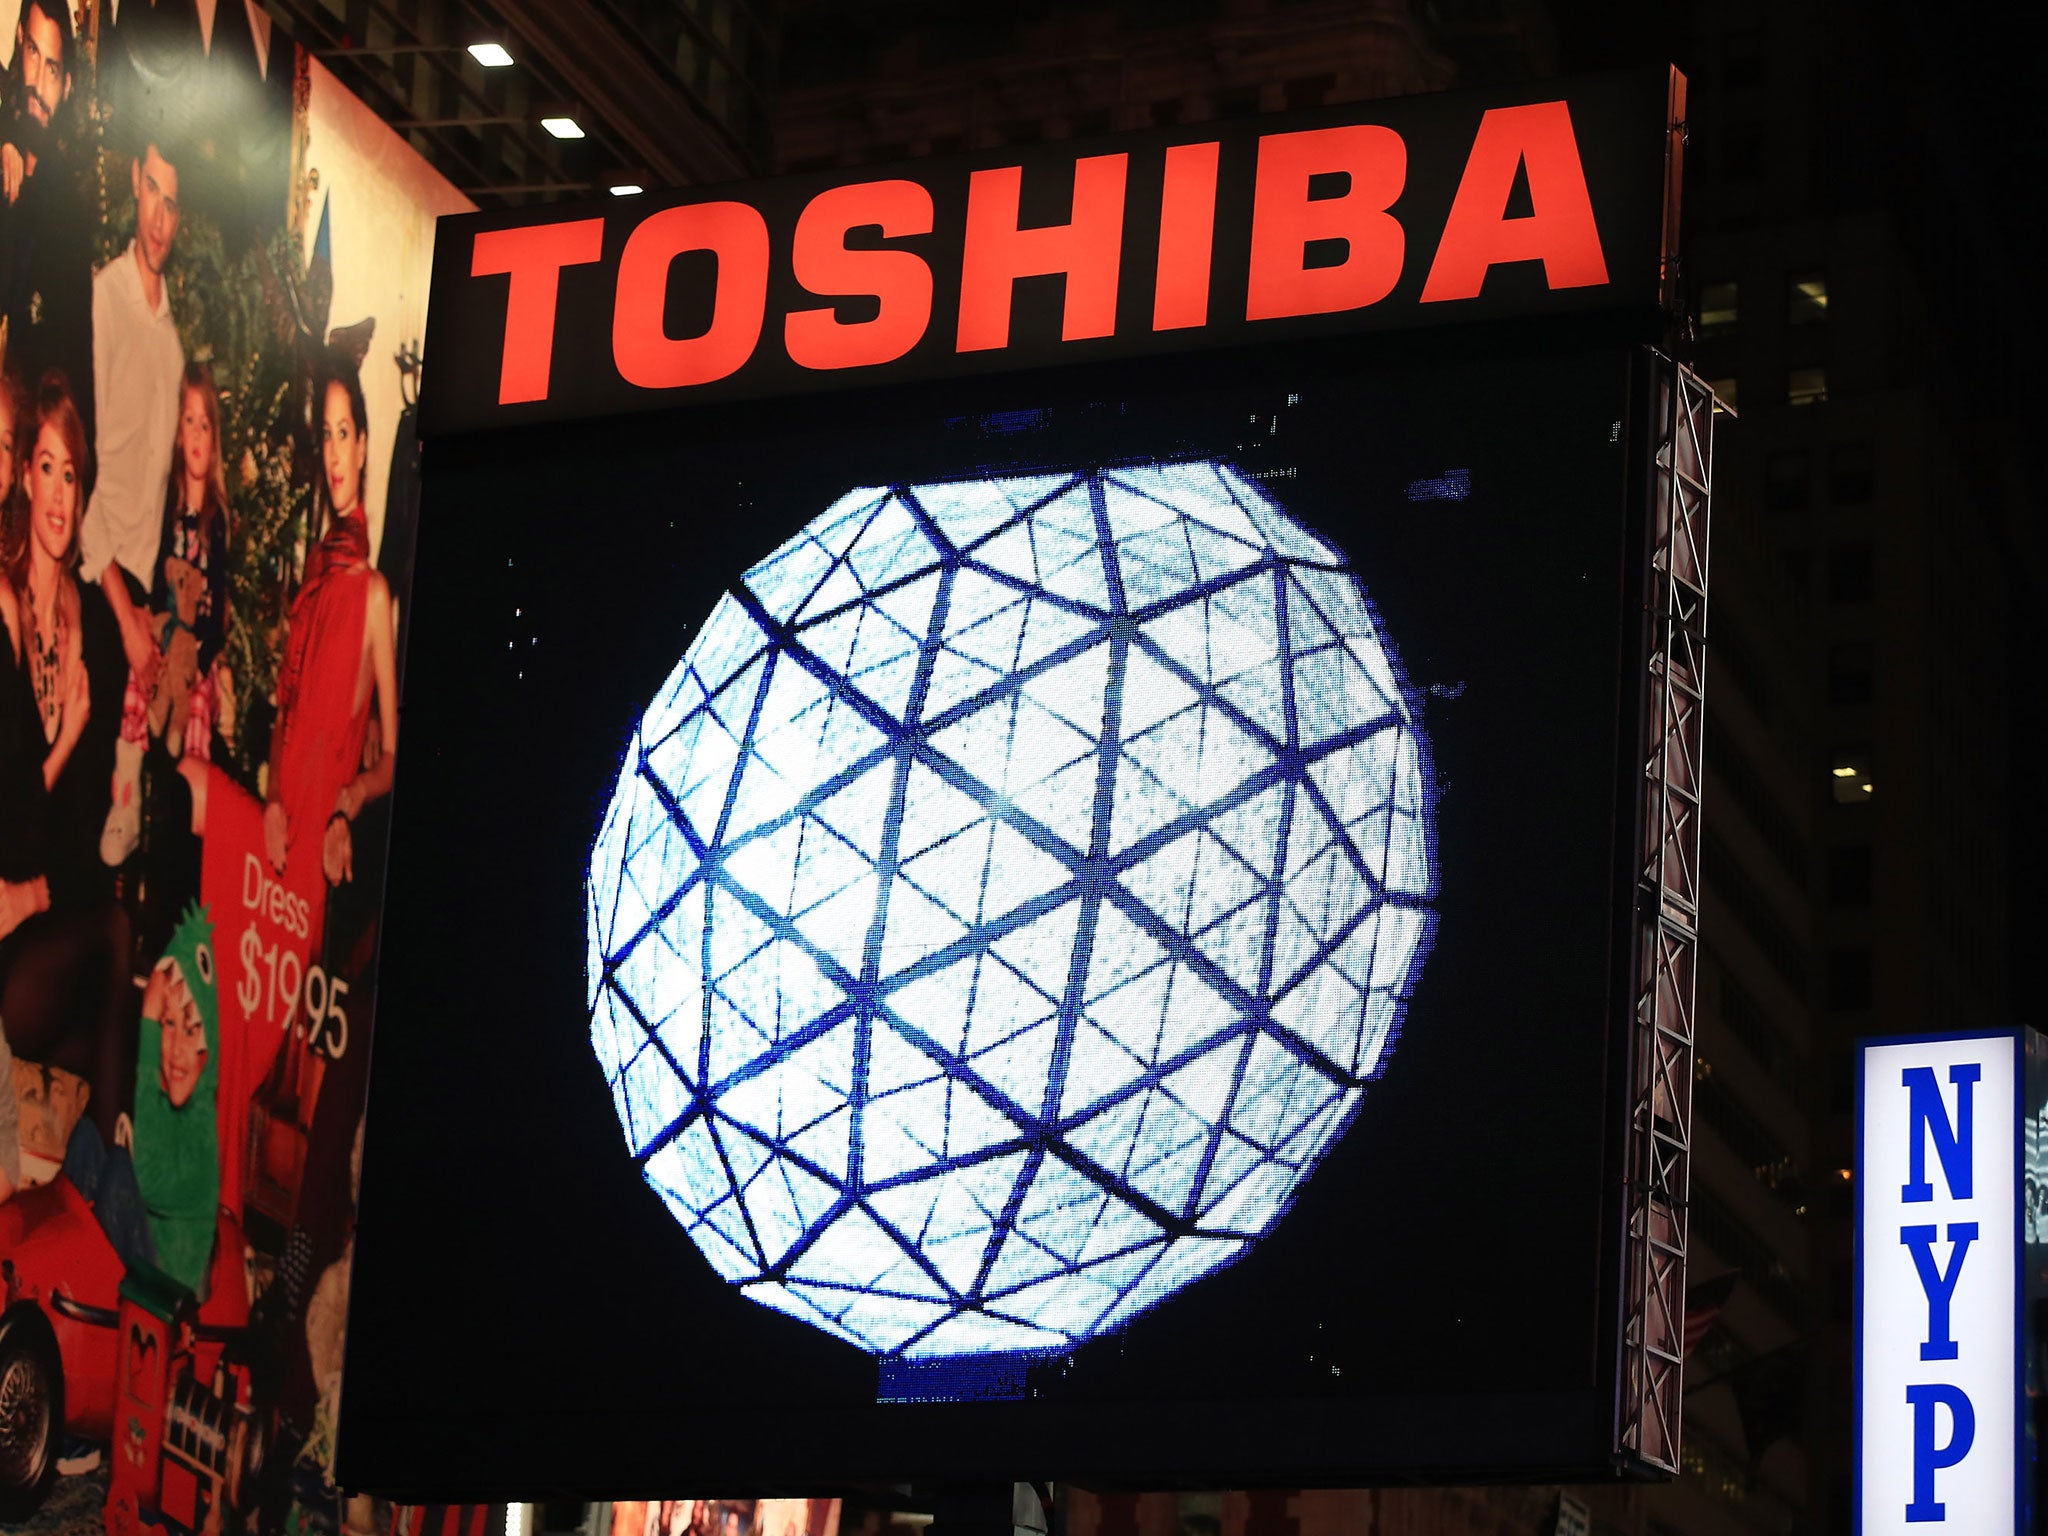 Toshiba posted loses of 576.3bn yen (£4.2bn) for the nine months ending 31 December 2016